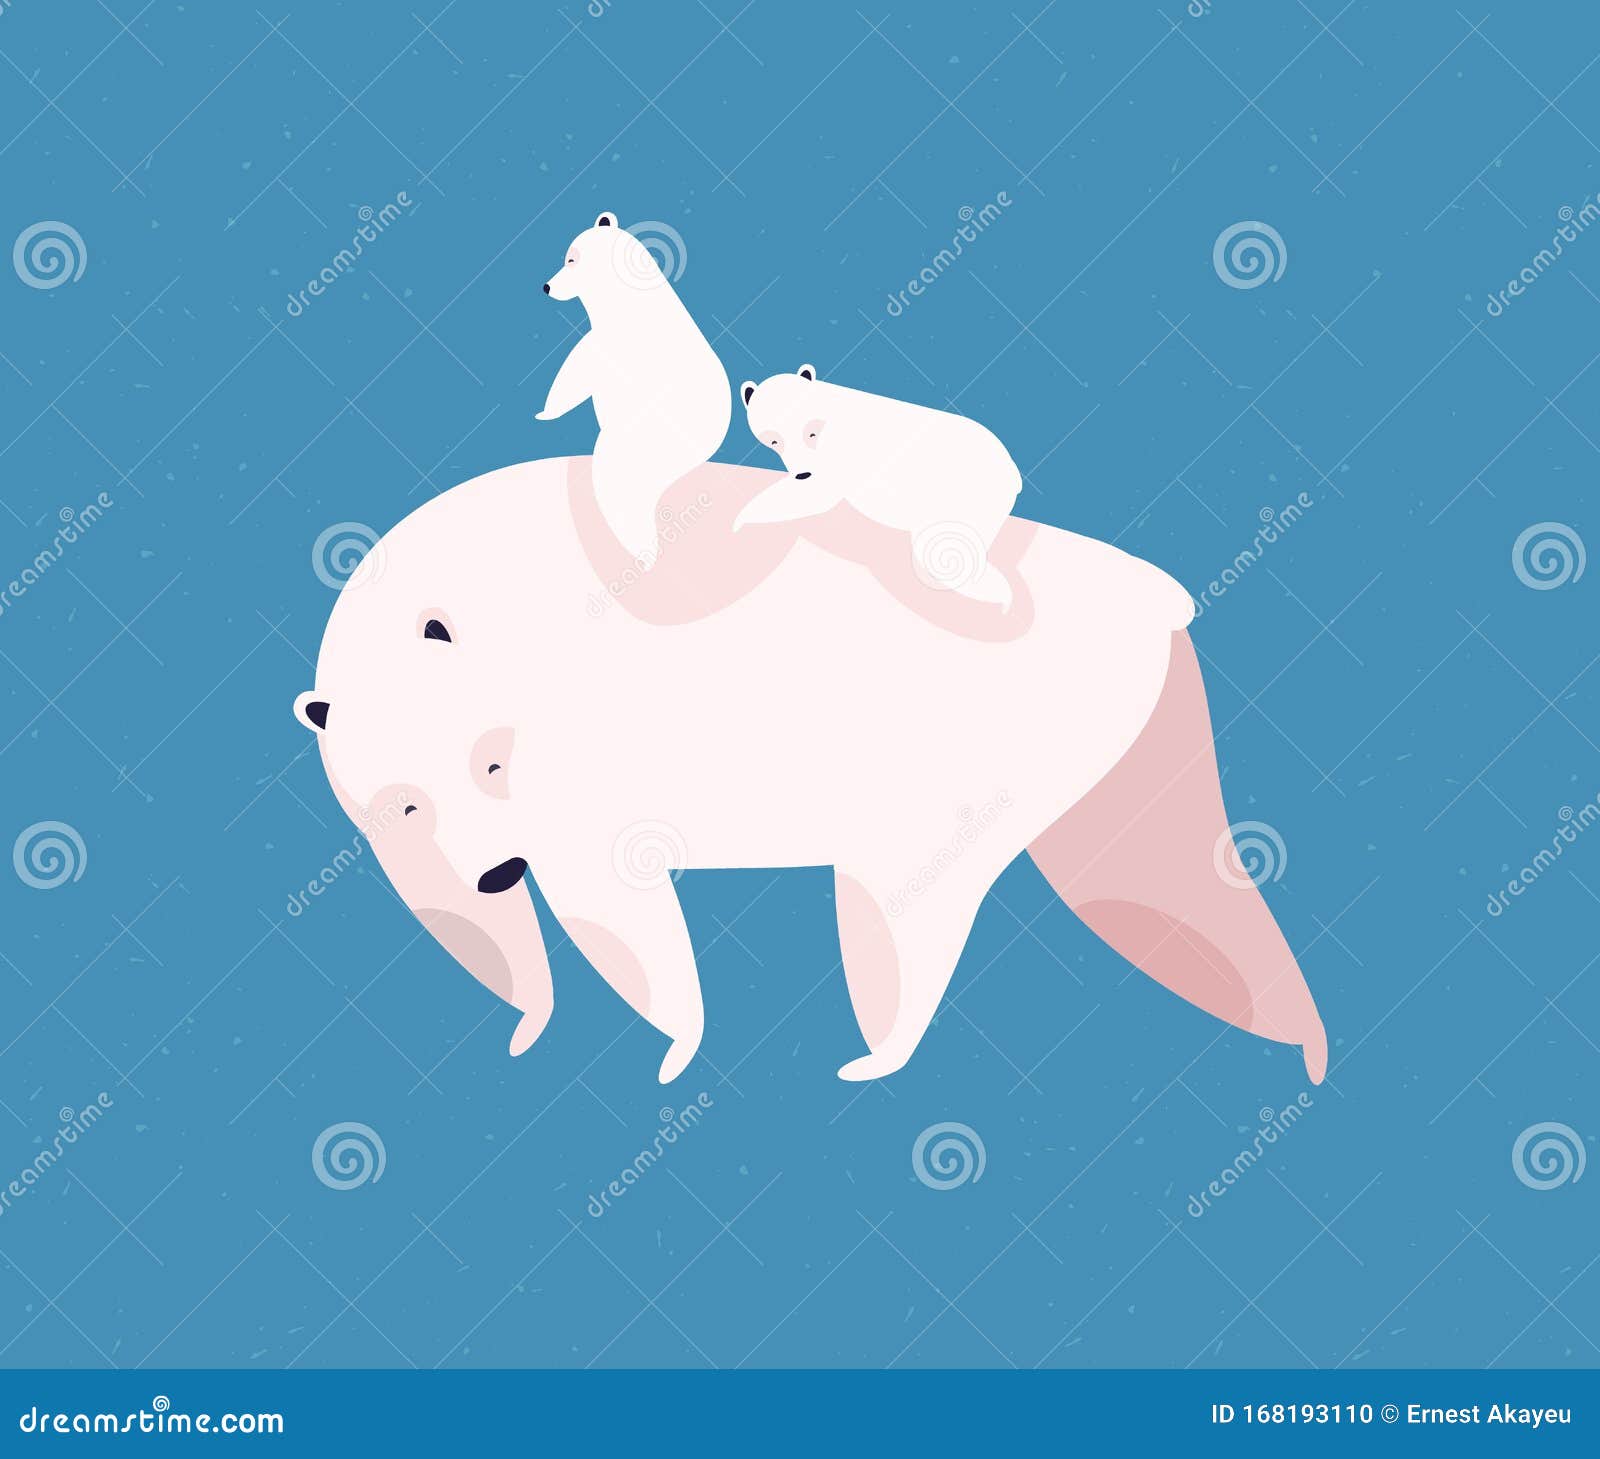 polar bears family flat  . motherhood, love and fondness, tenderness and affection concept. cute